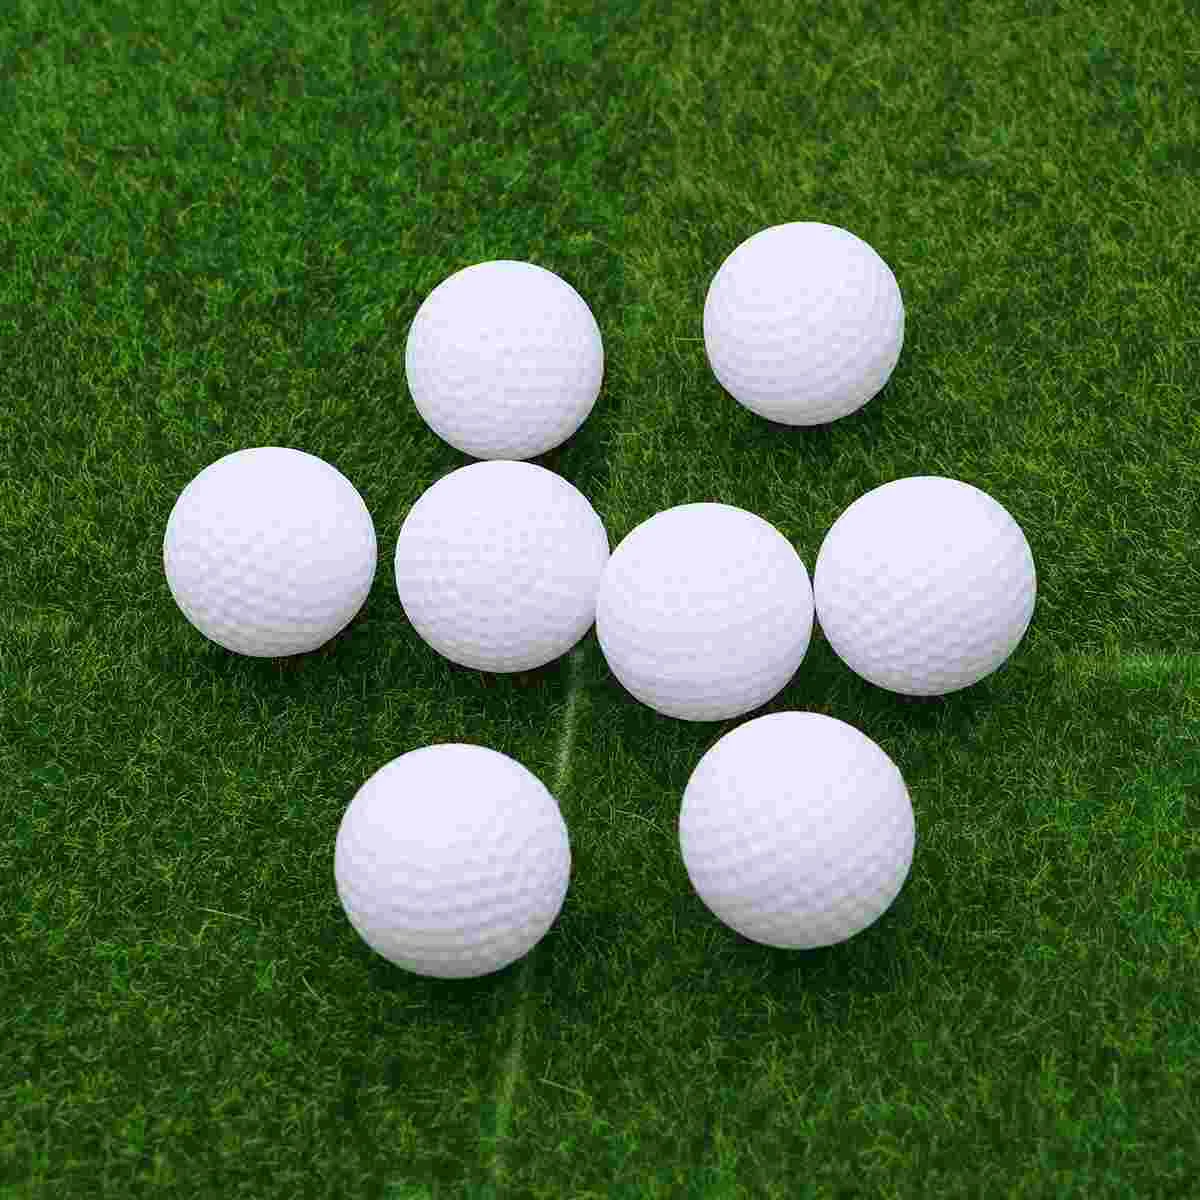 

New Product Golf Ball Interior Beginner Training Soft Ball White Baby Boys Outdoor Playing Fun Ball Toys